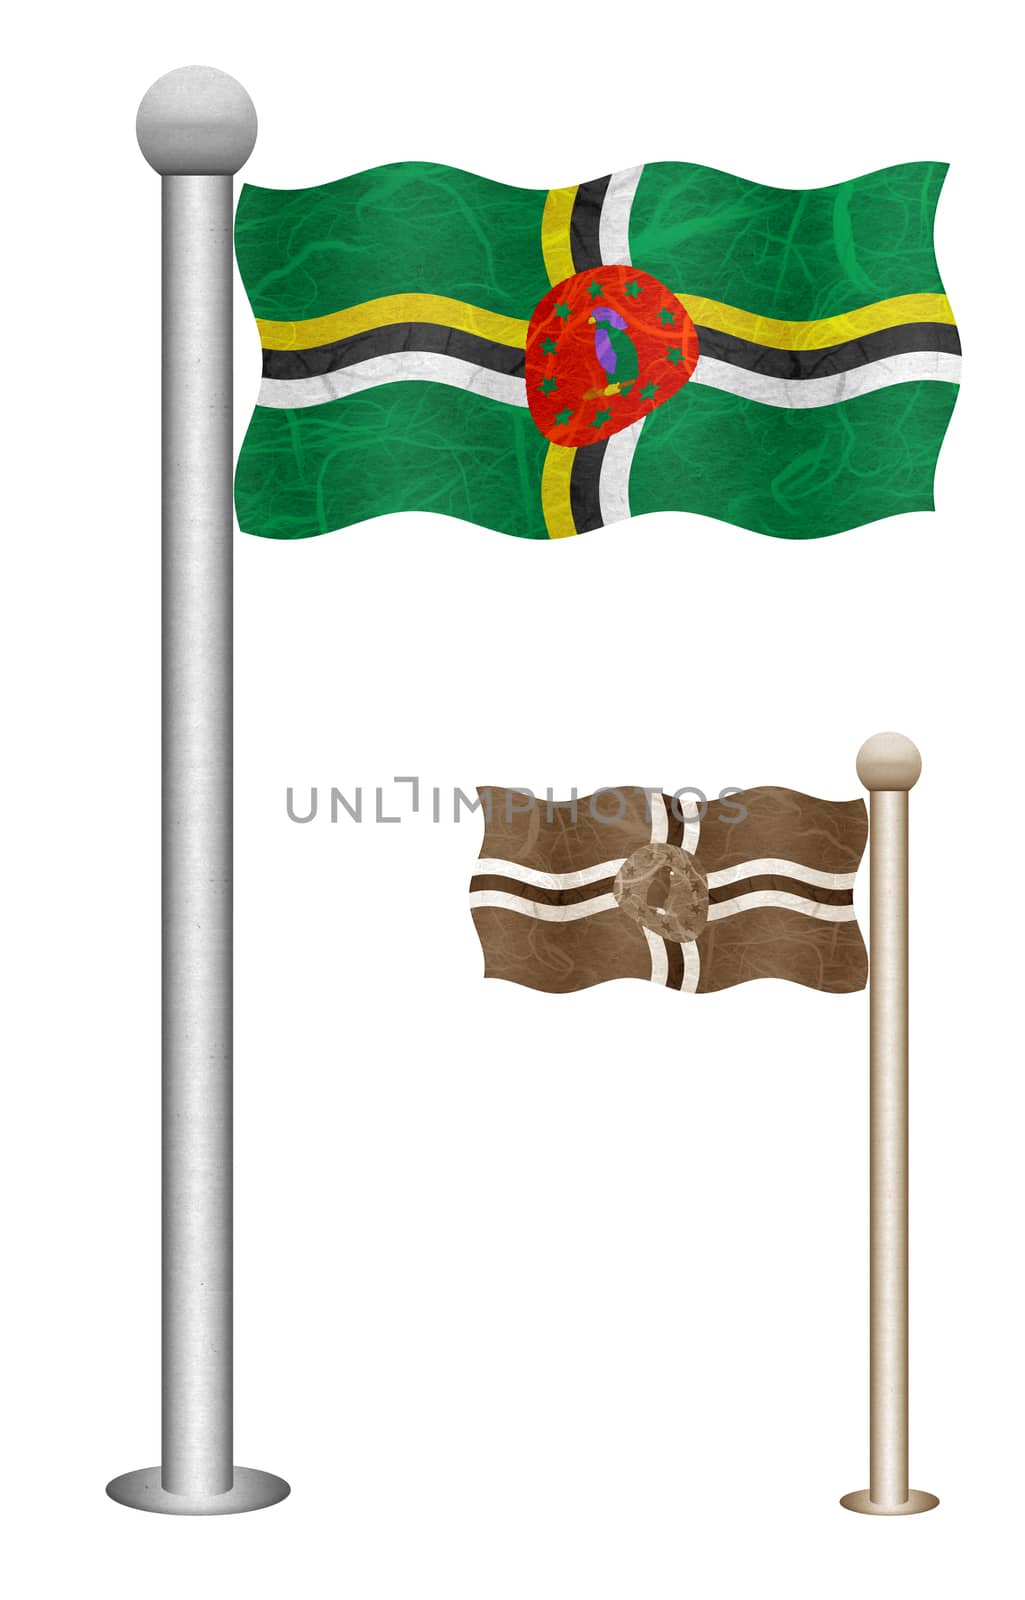 Dominica flag waving on the wind. Flags of countries in North America. Mulberry paper on white background.